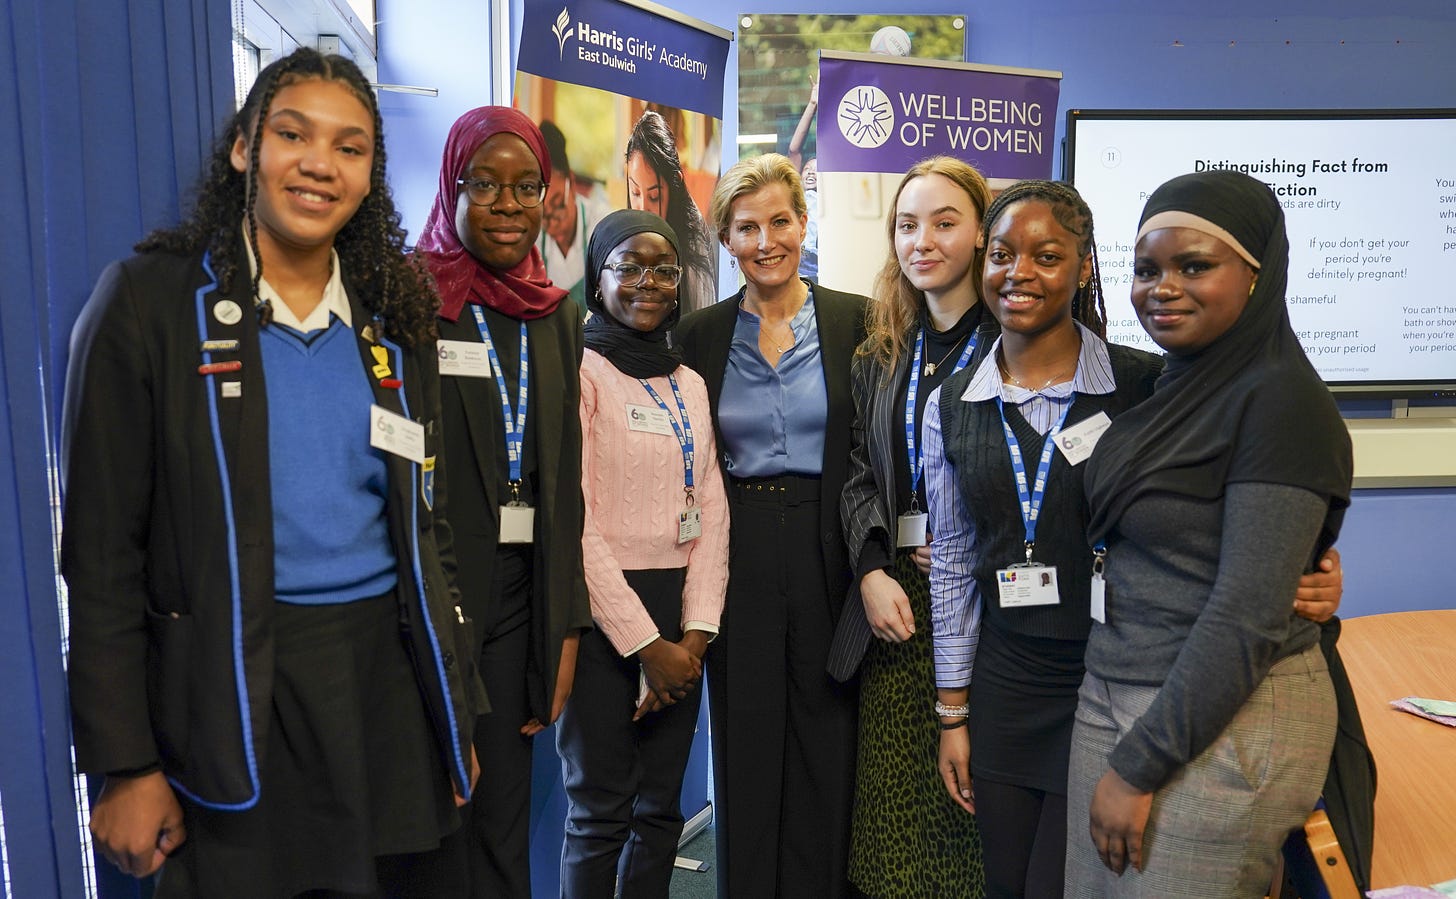 Duchess Sophie with pupils at Harris Girls’ Academy